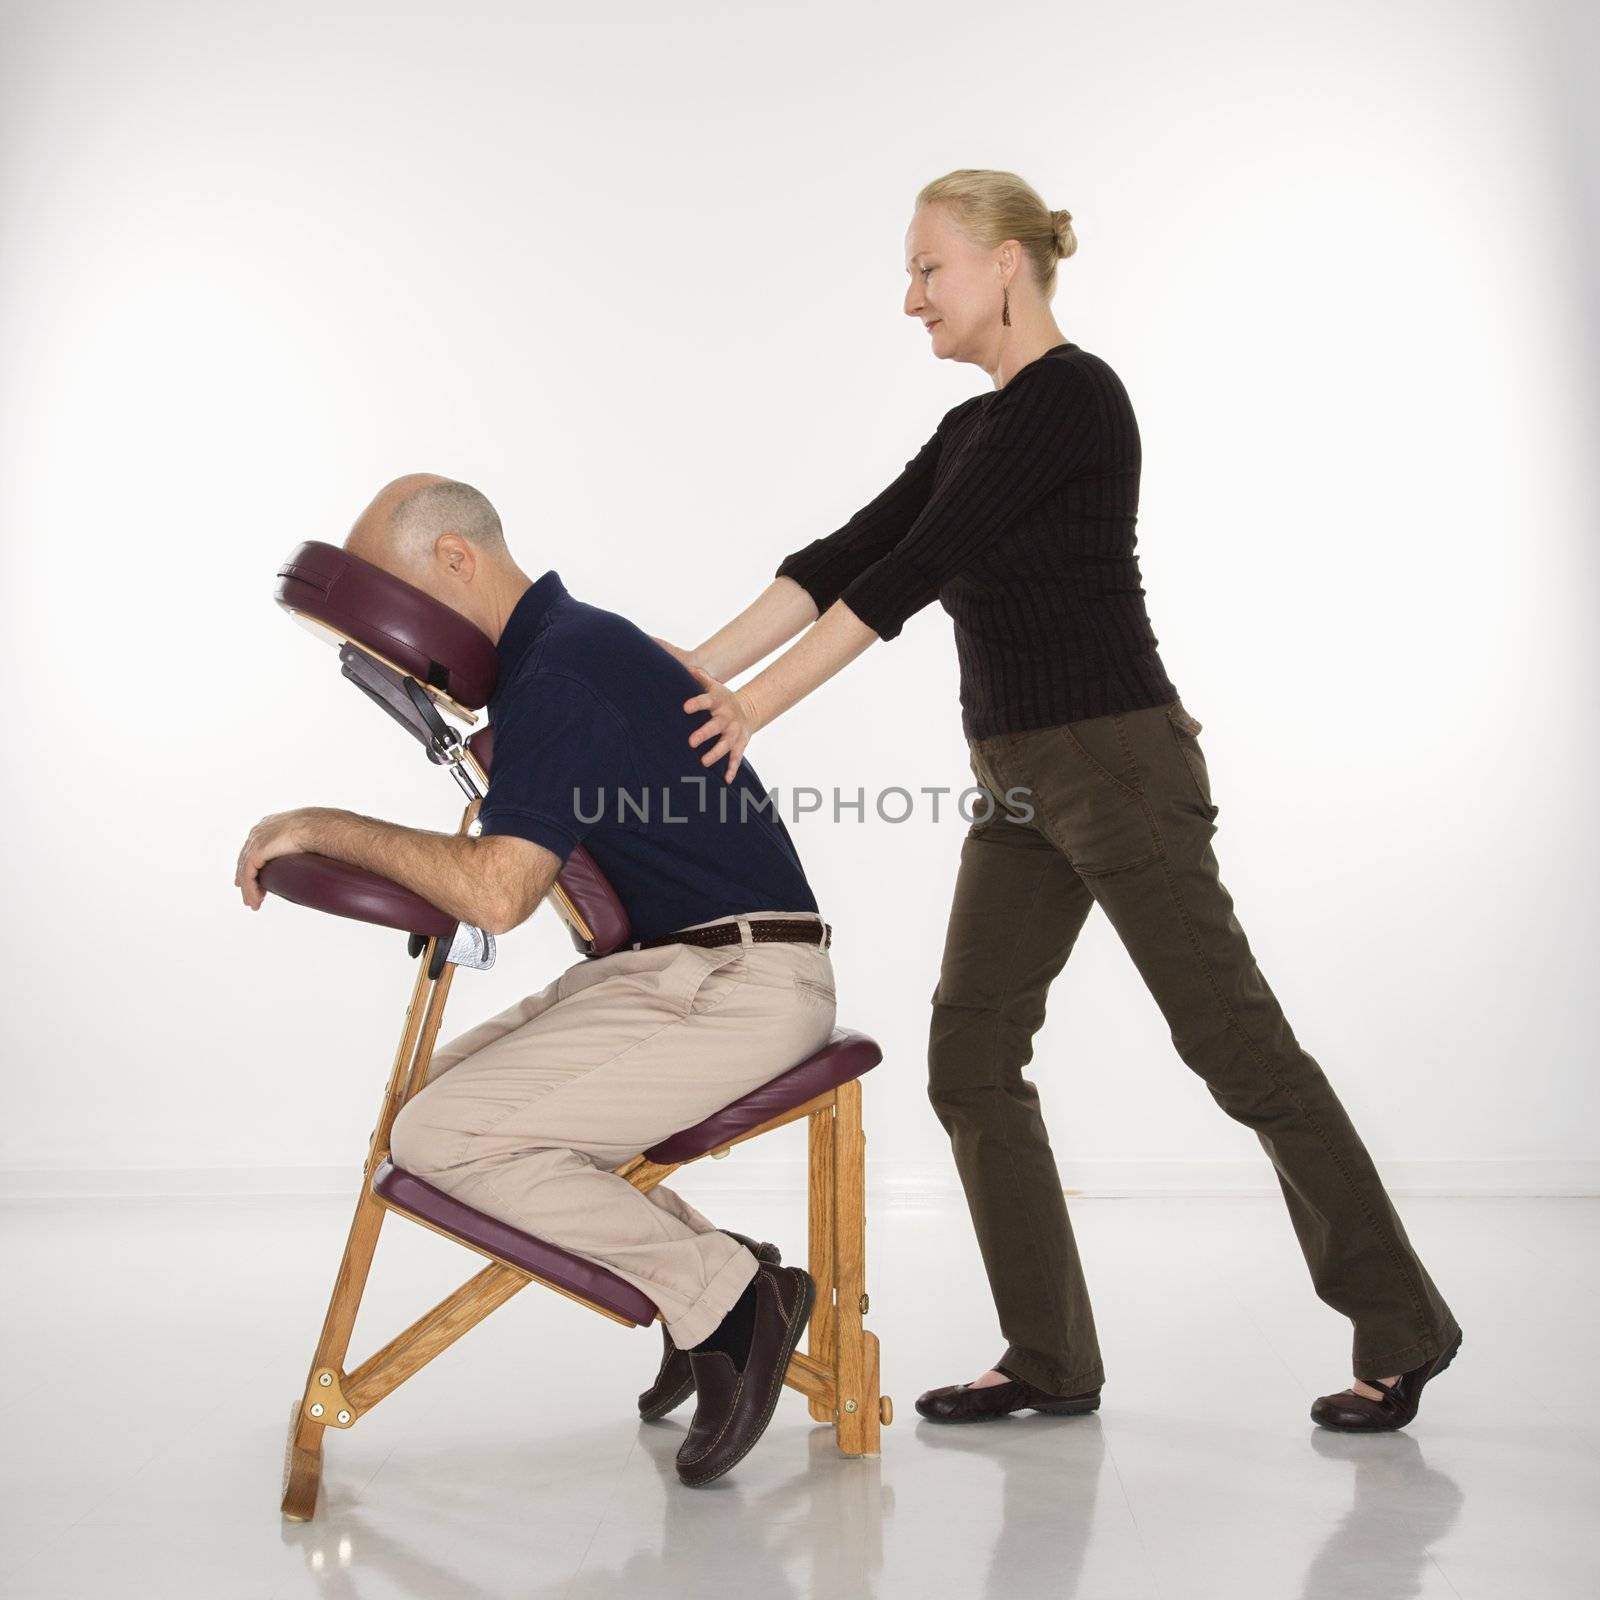 Caucasian middle-aged female massage therapist massaging back of Caucasian middle-aged man sitting in massage chair.